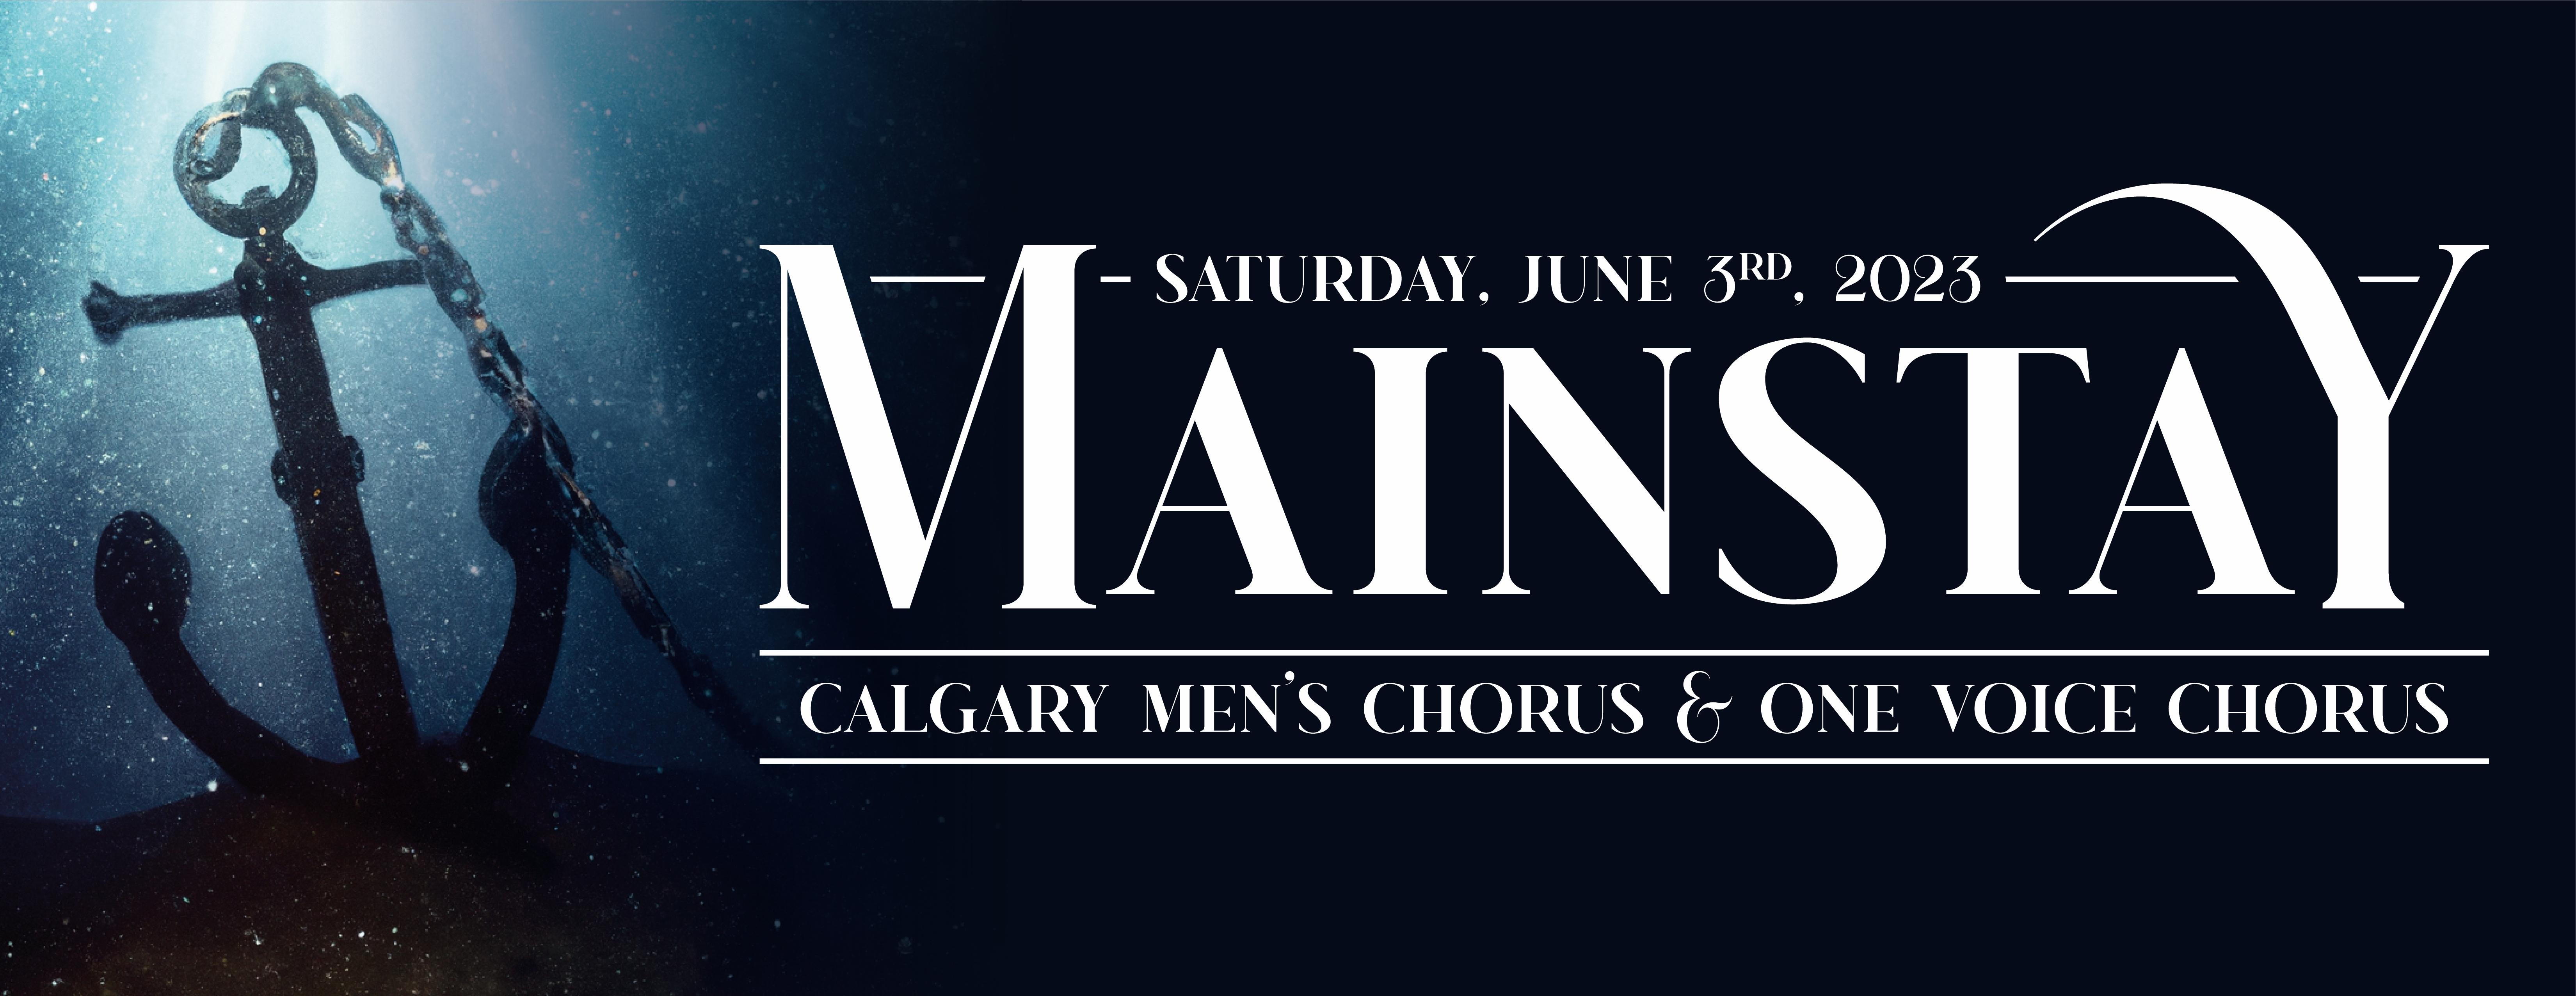 Join the Calgary Men's Chorus and One Voice Chorus for a meaningful evening of music as they present Mainstay, a home staging of each choir’s 2023 Unison Festival set. Not only does this year's Unison Festival theme, 